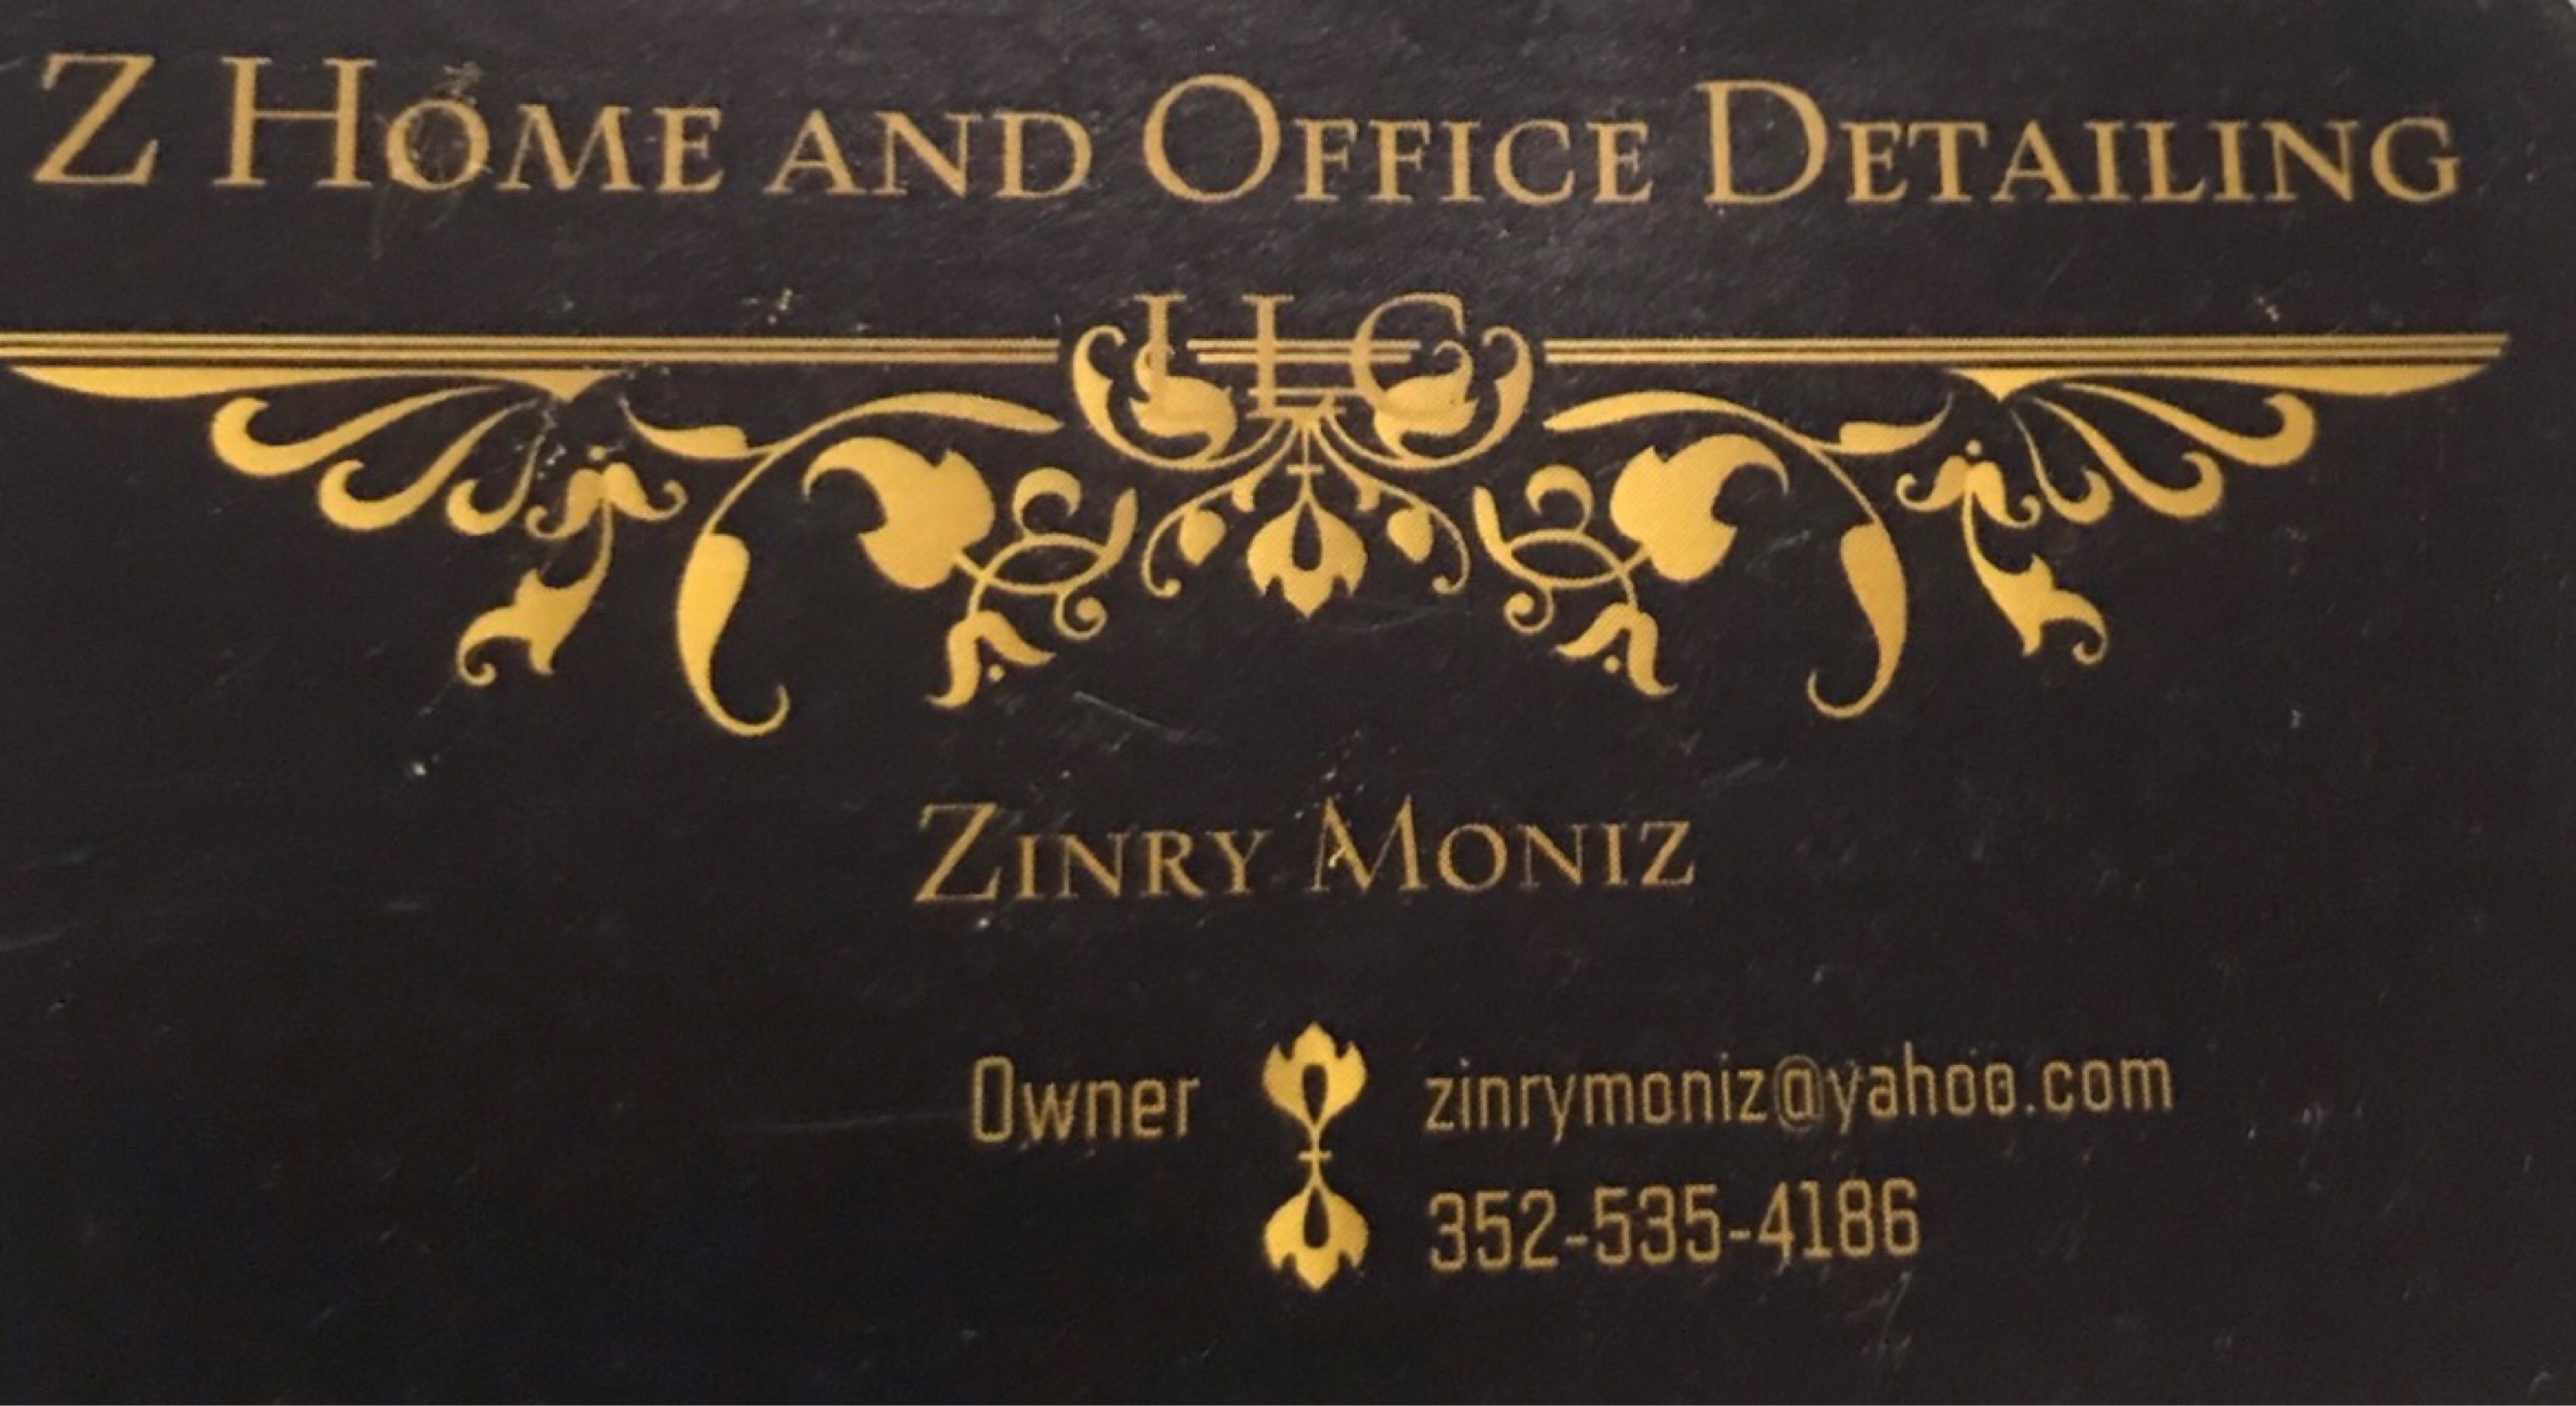 Z Home and Office Detailing LLC Logo